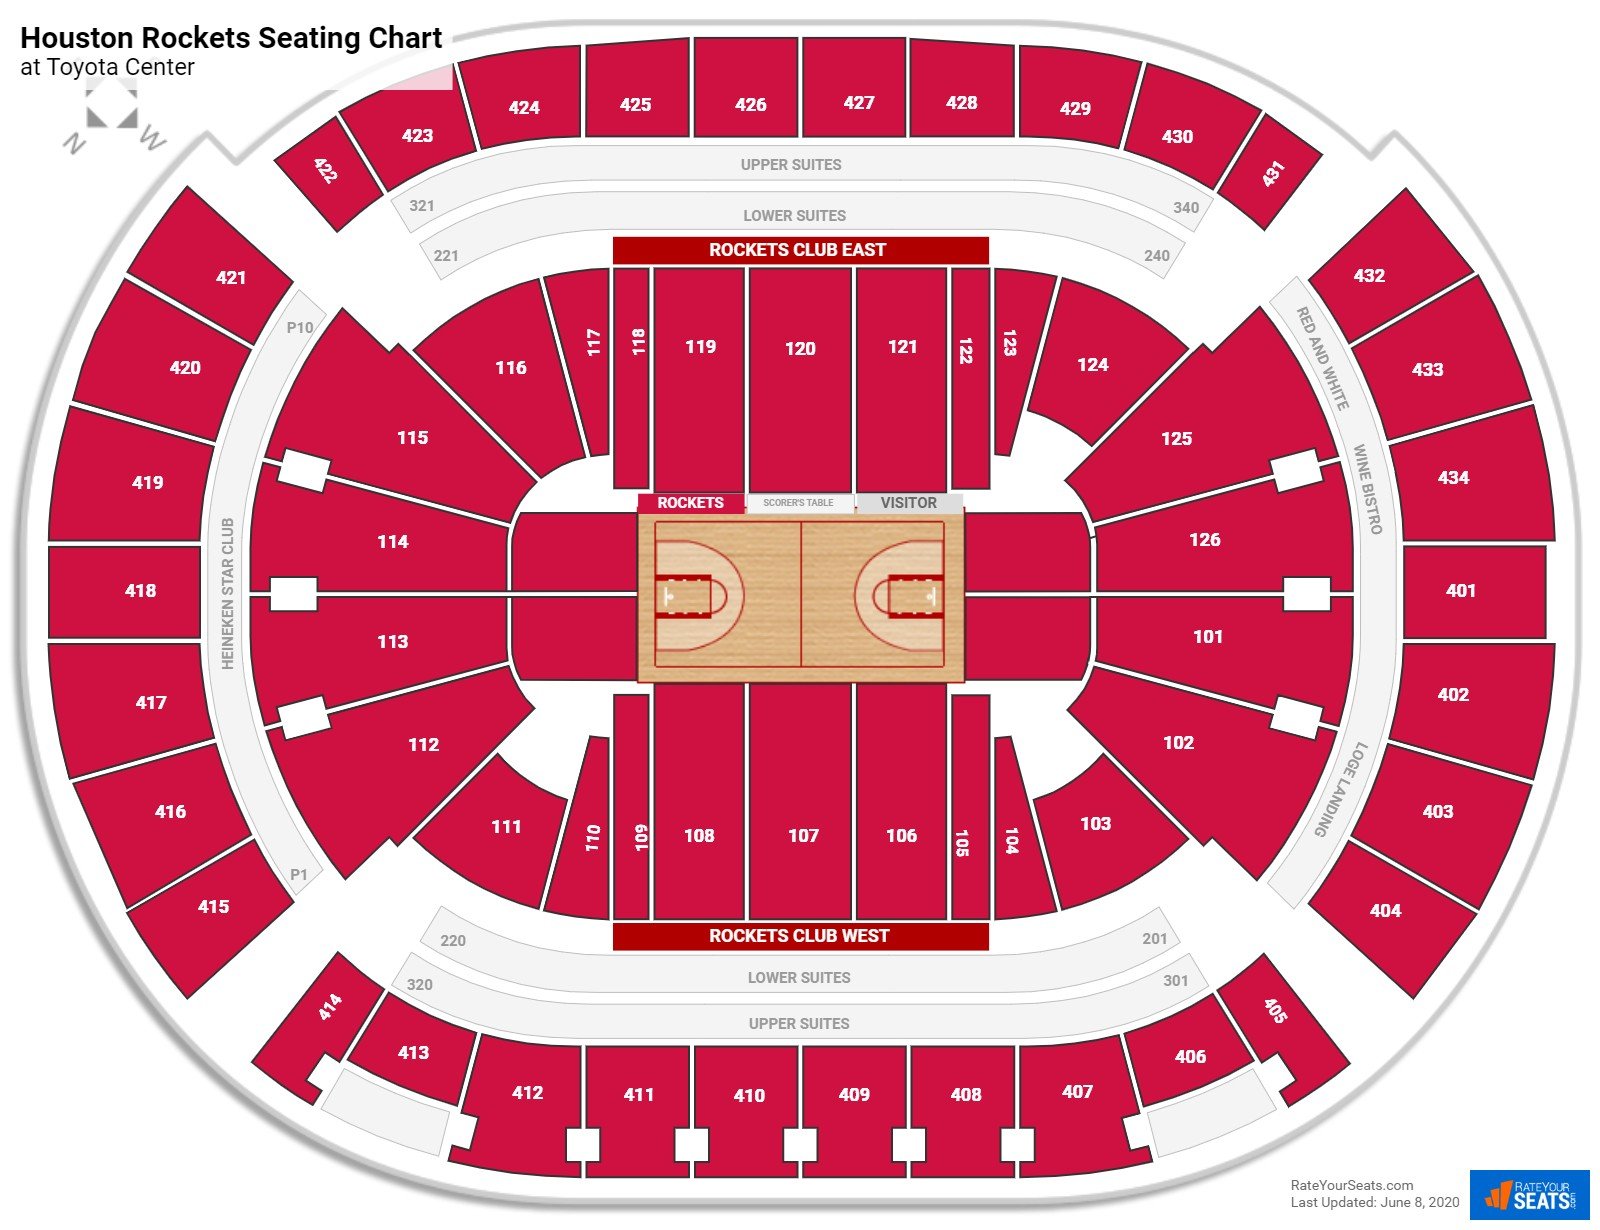 Houston Rockets Seating Charts at Toyota Center - RateYourSeats.com